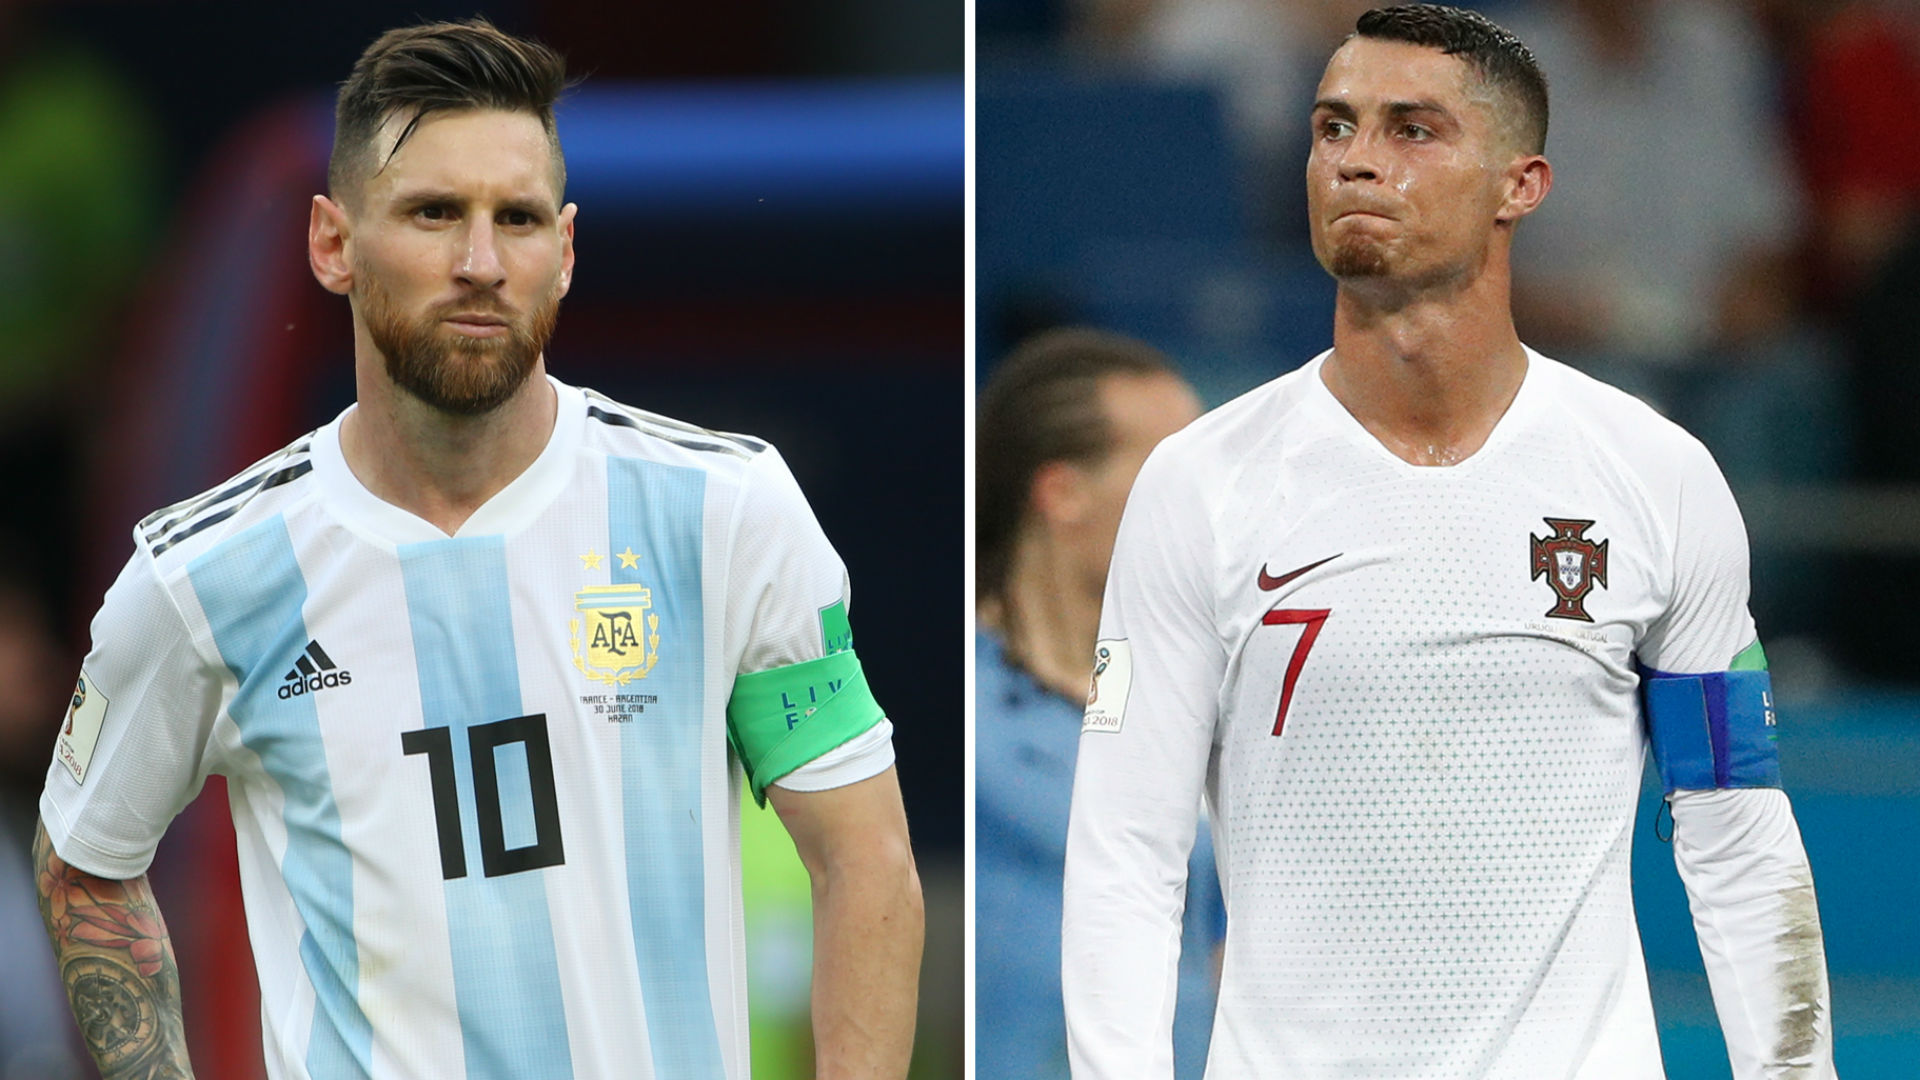 Lionel Messi vs Cristiano Ronaldo: Who has bailed his national team out on most occasions?